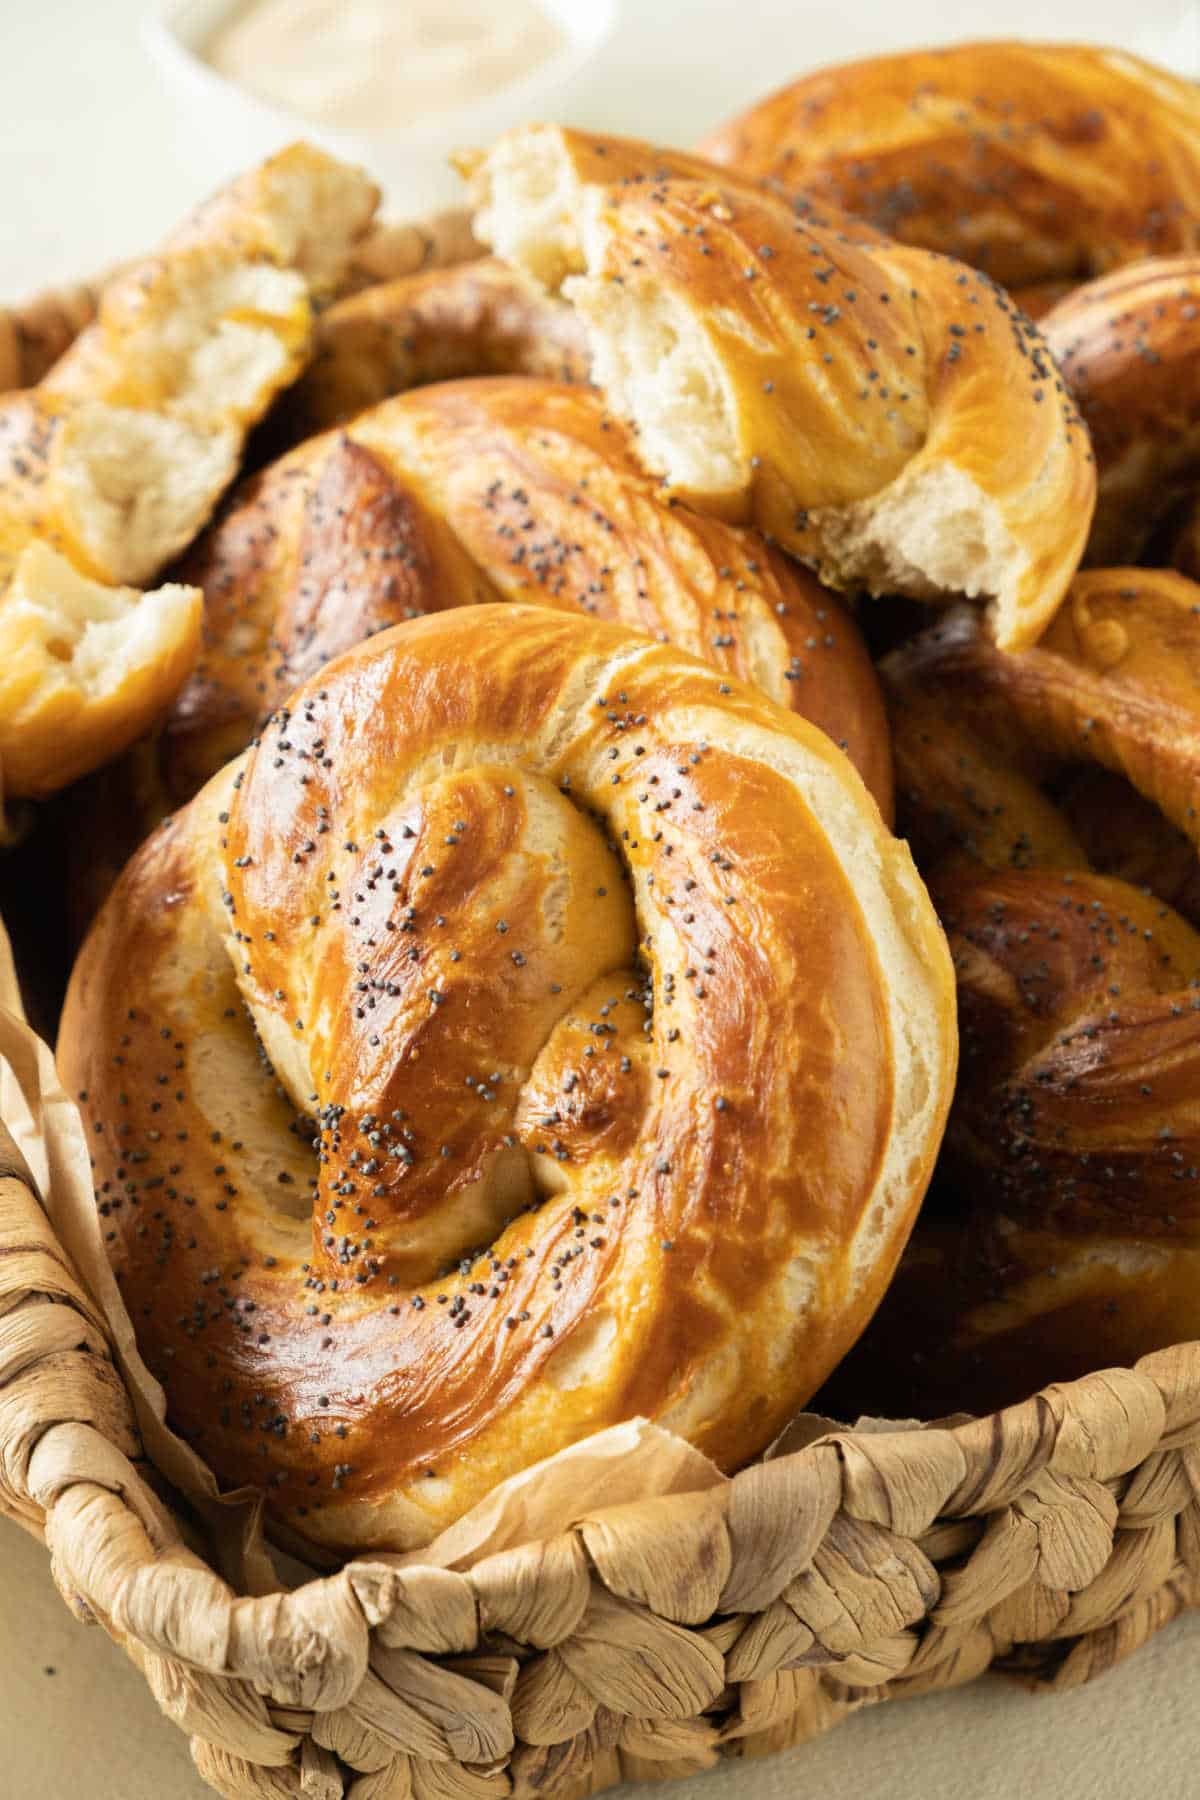 Basket with soft pretzels, whole and halved. Close up image.